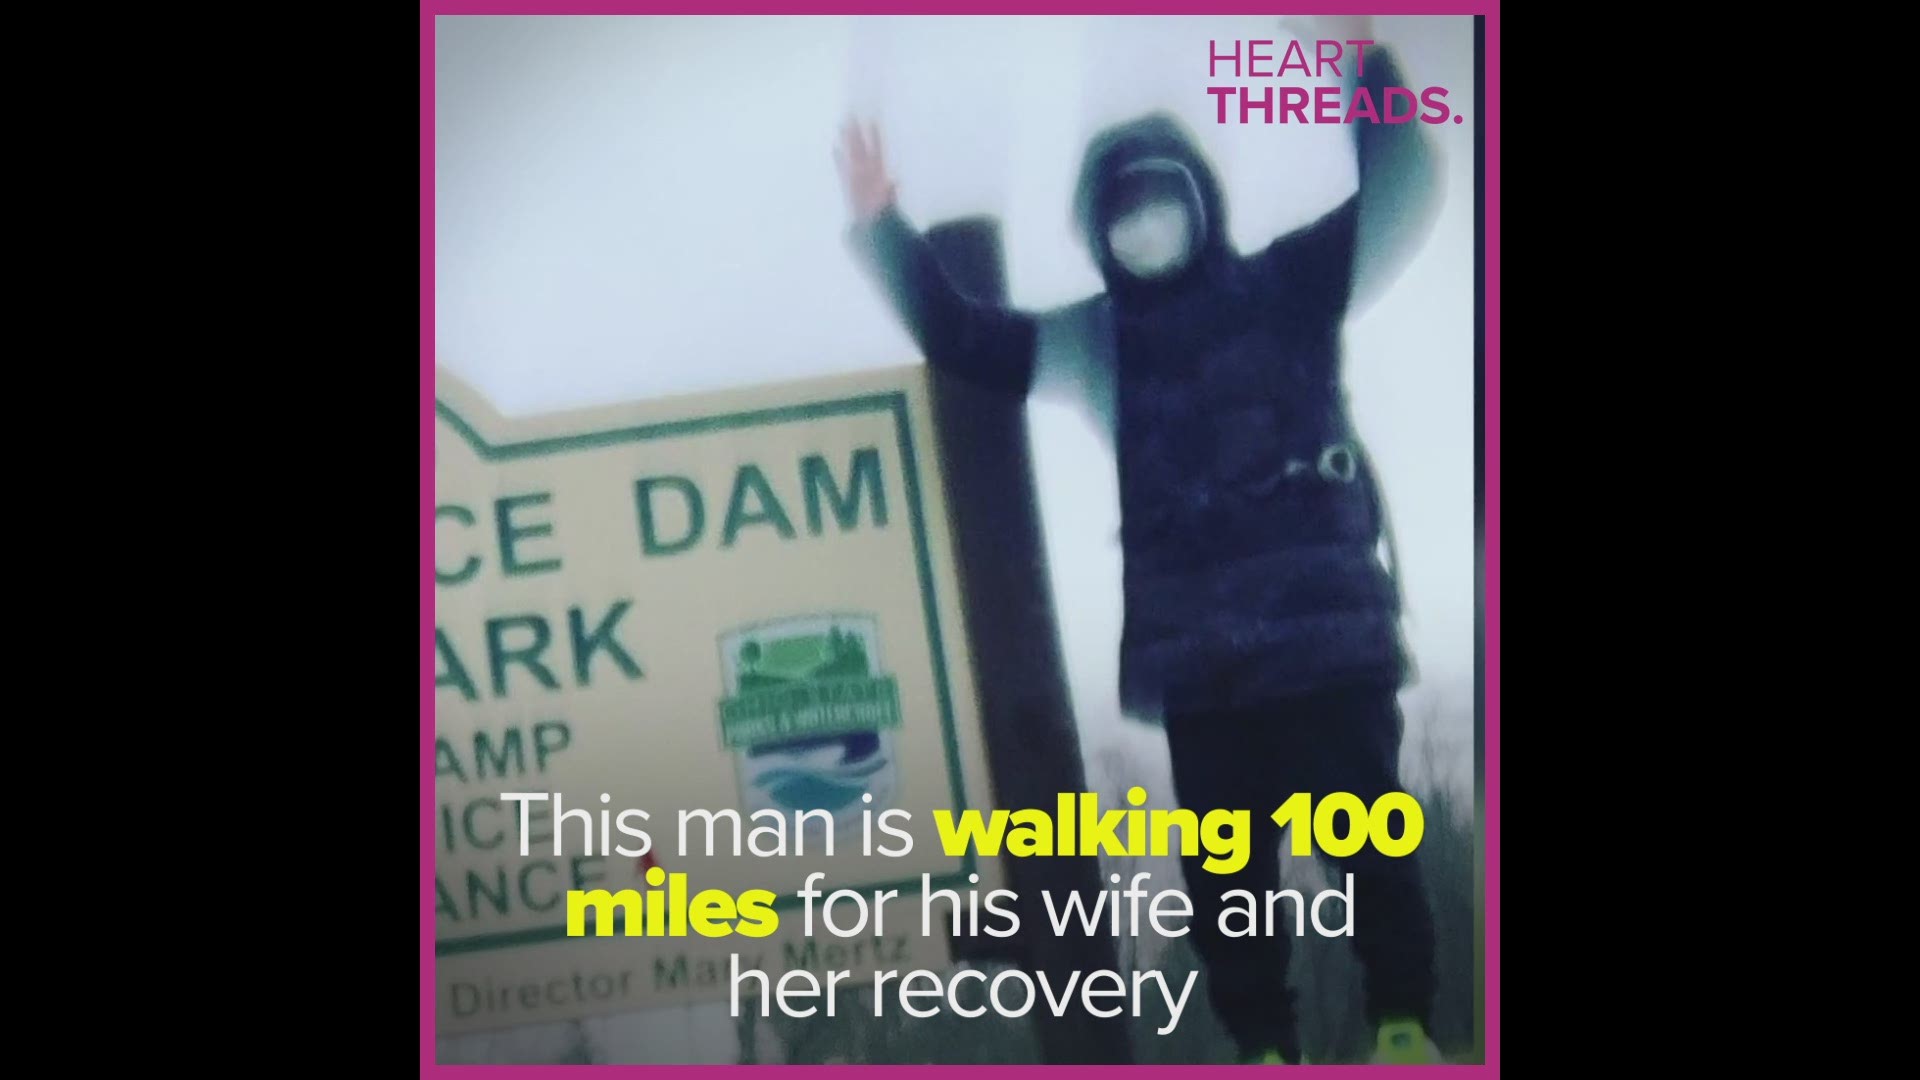 Vu Pham is walking 100 miles in honor of his wife Mylinh, who was hospitalized with a brain aneurysm.